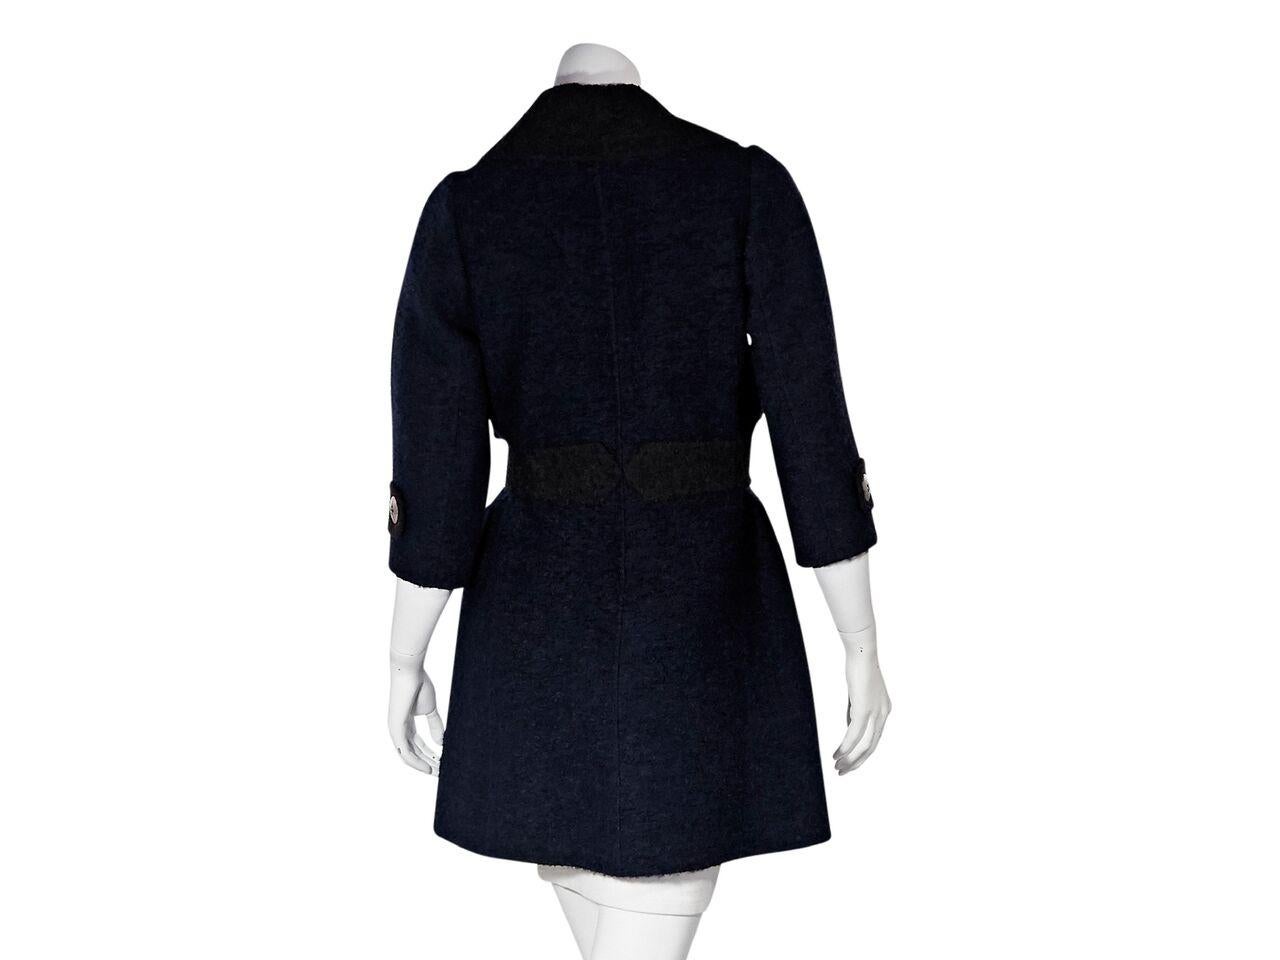 Product details:  Navy blue and dark brown wool-blend coat by Marc Jacobs.  Notched lapel.  Elbow-length sleeves.  Button-front closure.  Self-tie belted waist.  Button flap front pockets.  Silvertone hardware.  35